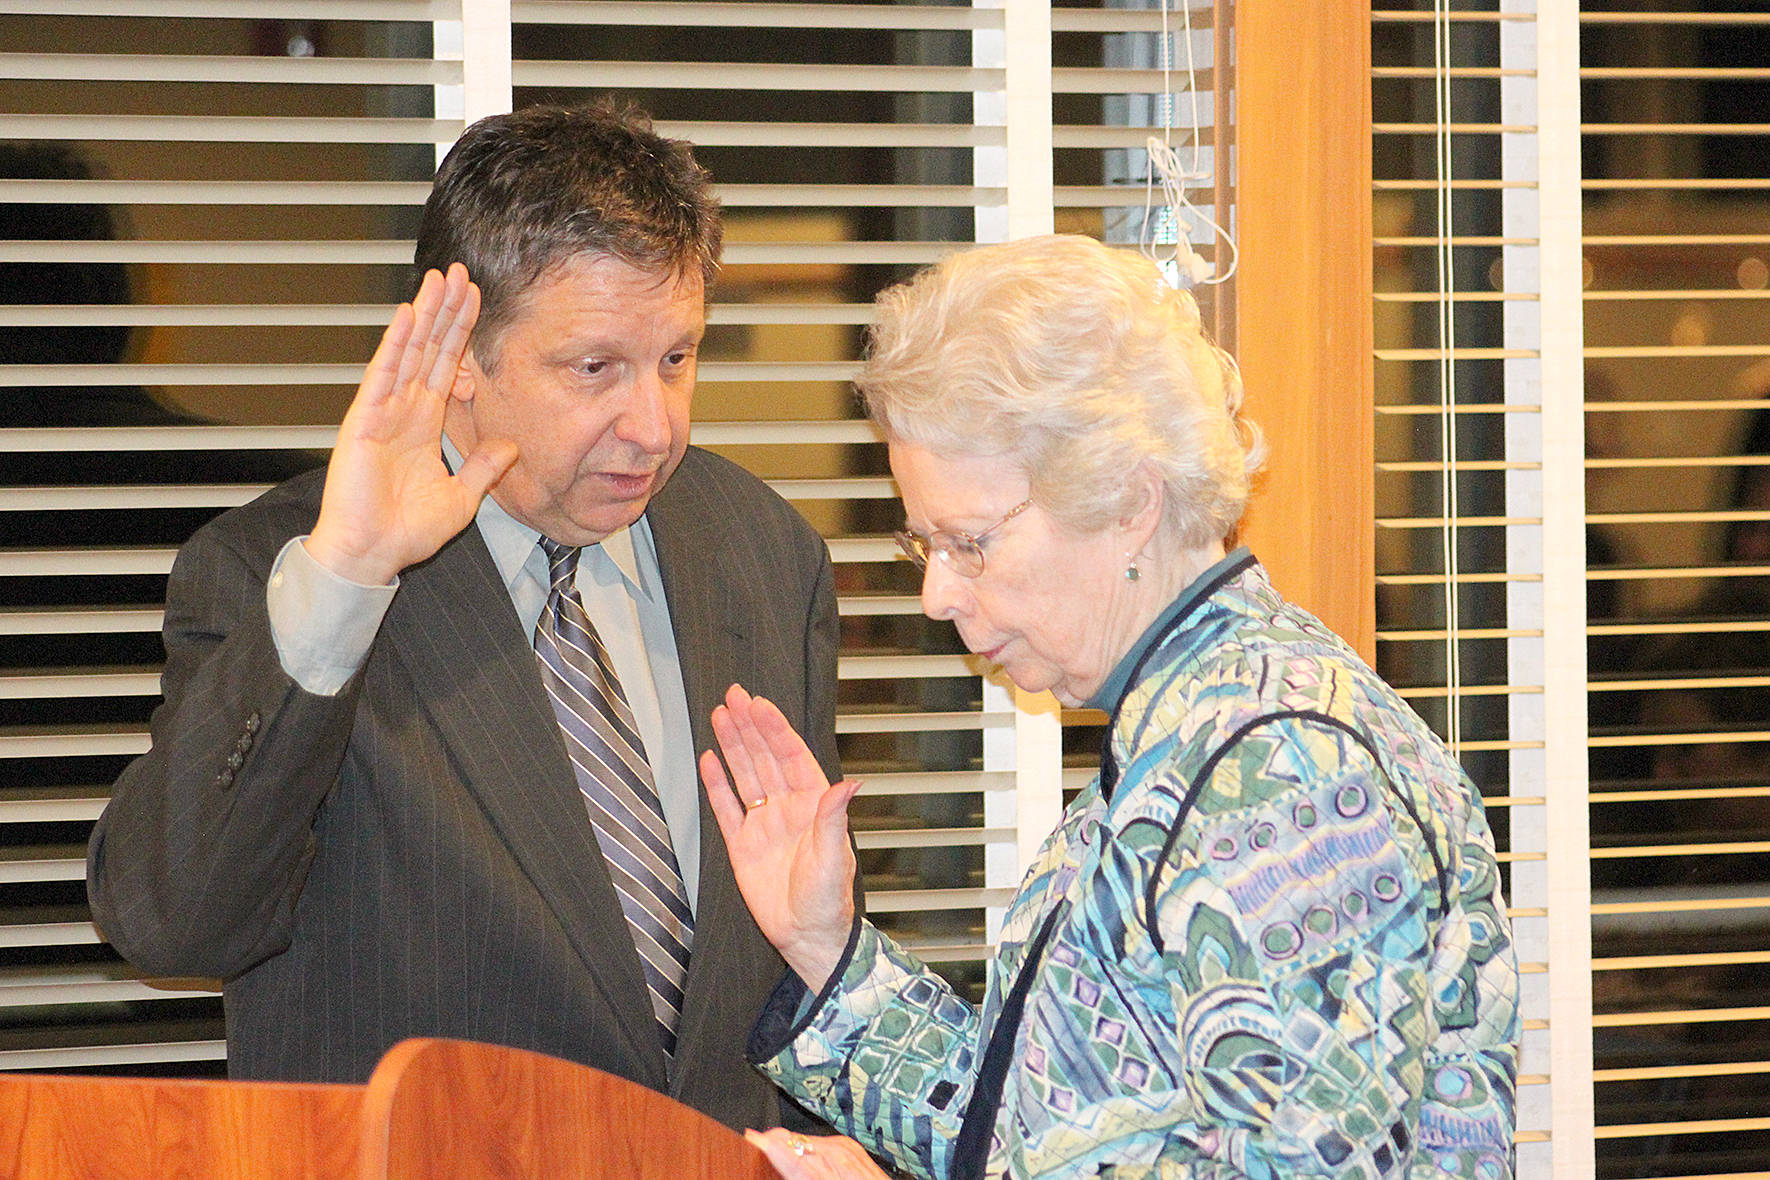 Maple Valley City Councilmember Linda Johnson takes the Oath of Office during the first council meeting on Monday, Jan. 6, 2019. Photo by Danielle Chastaine.